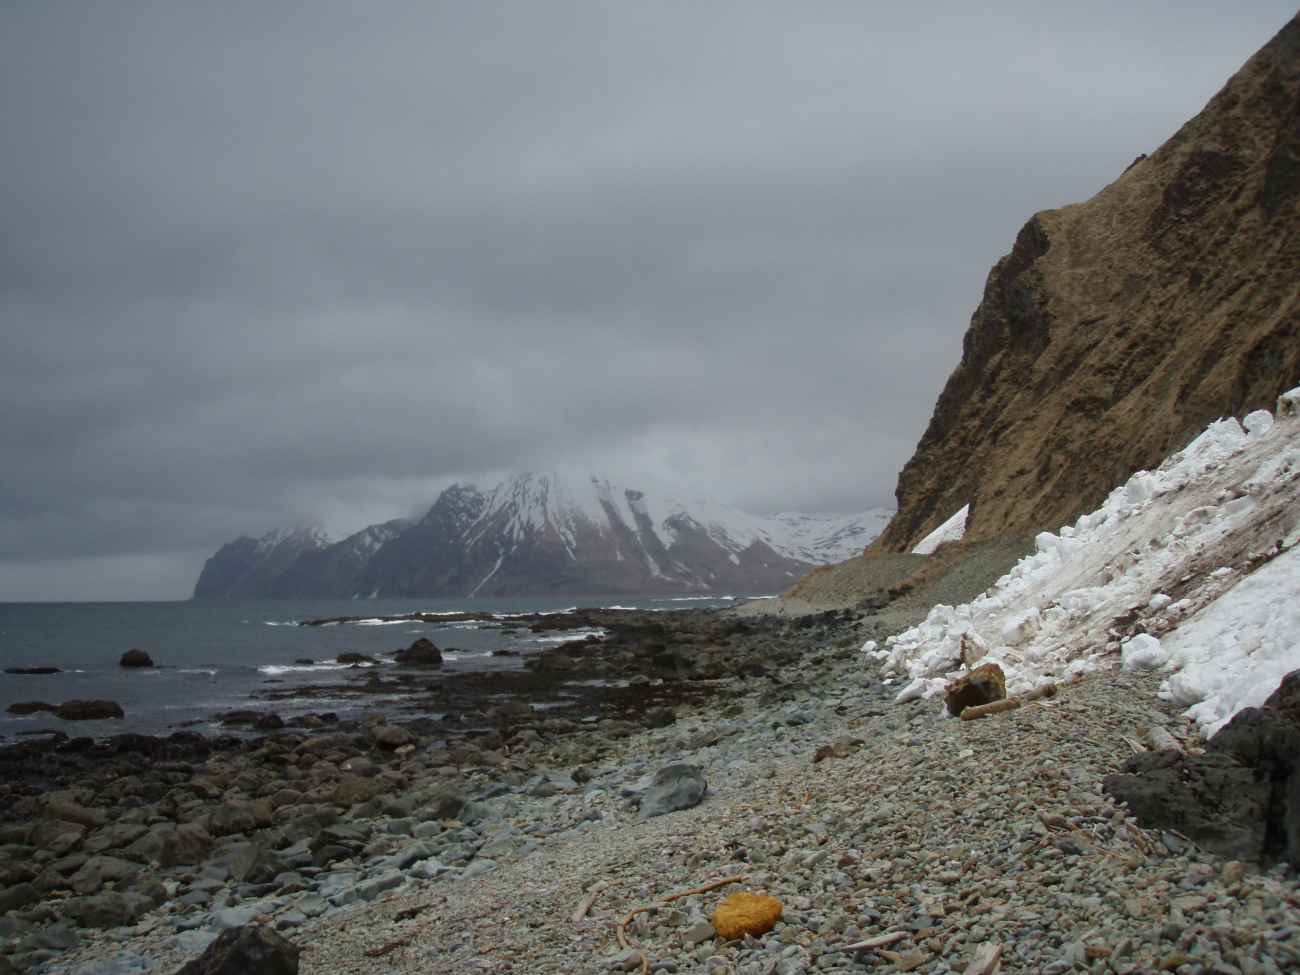 Doesn't look like much sun-bathing is done on this beach! Cobbles, boulders, and snow coming to the base of mountain cliffs along this Aleutian beach